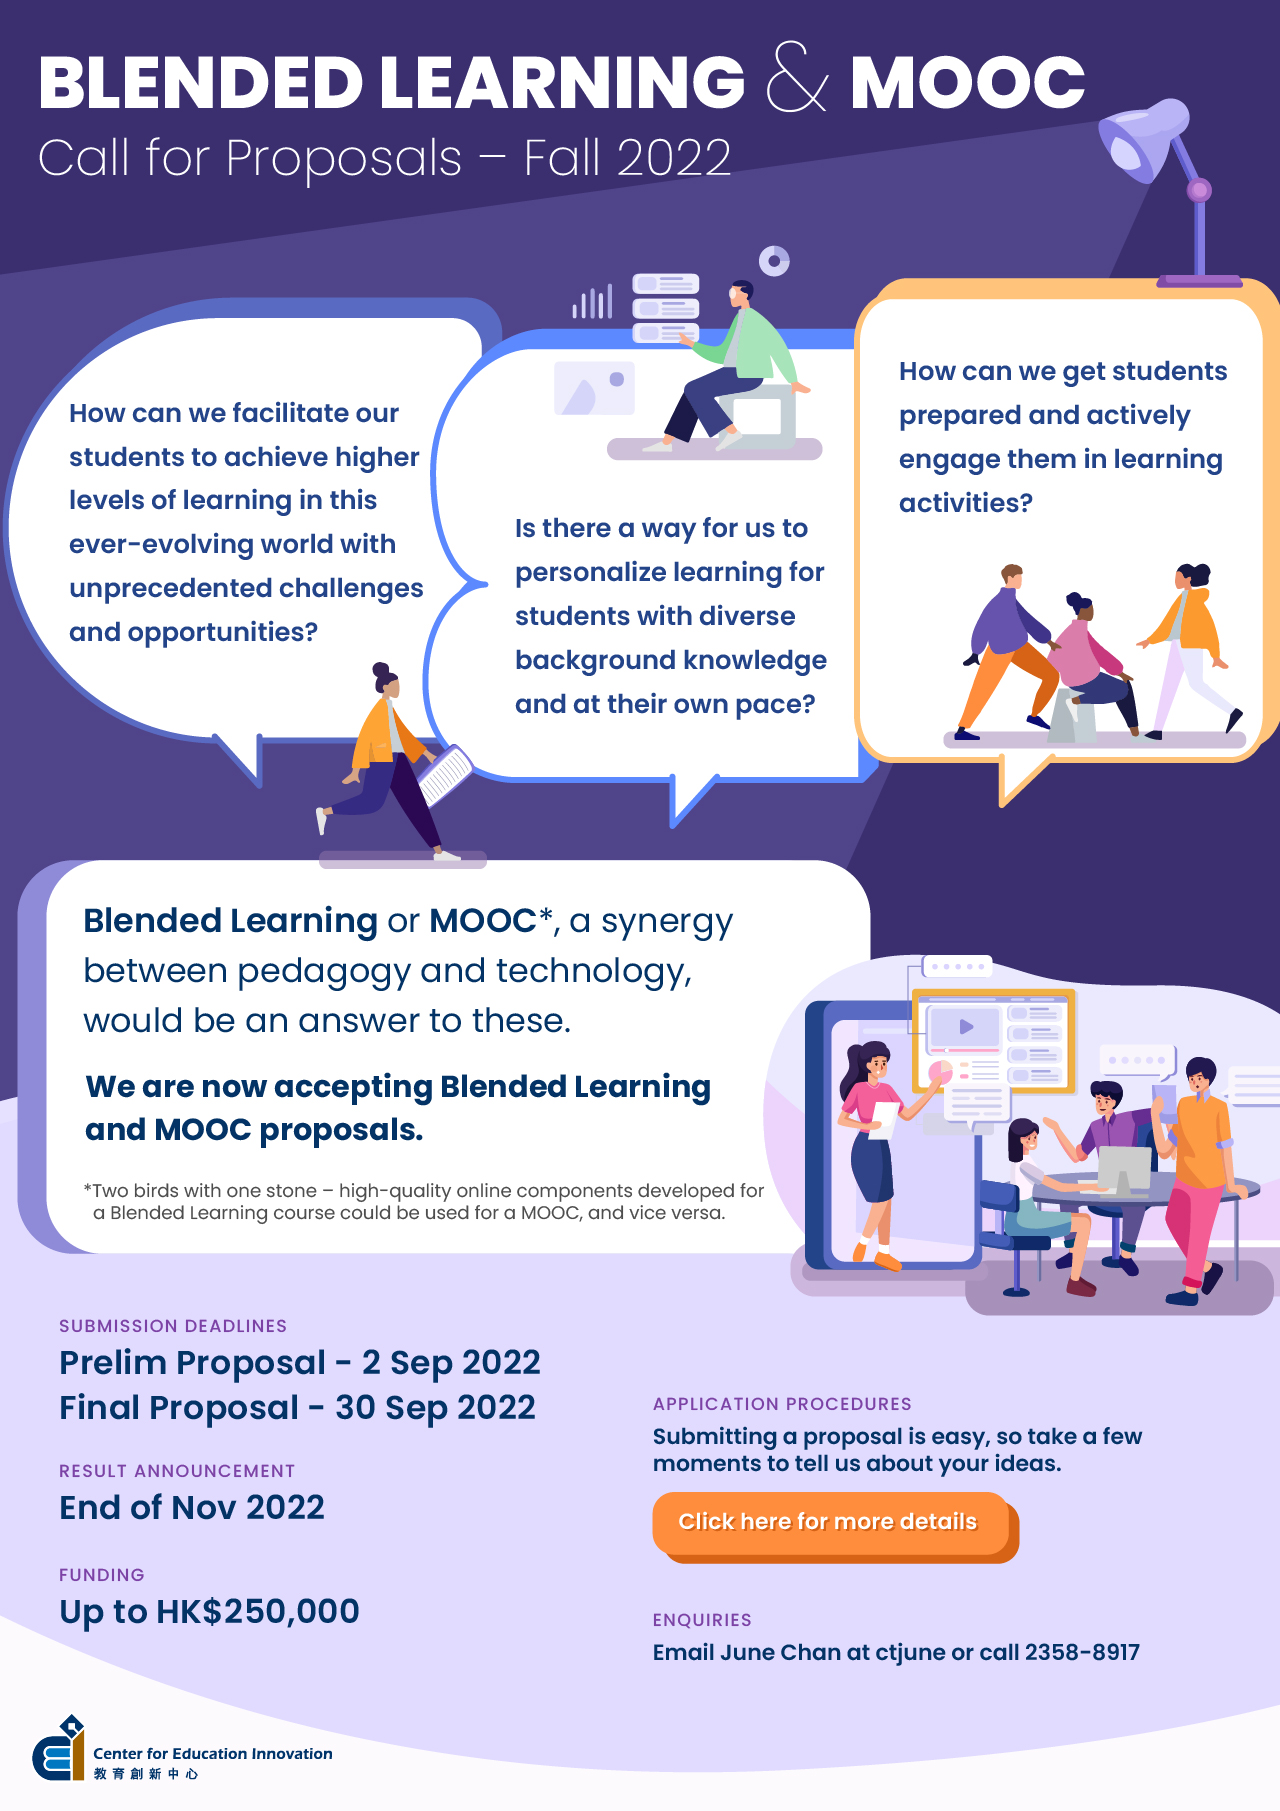 Blended Learning & MOOC Call For Proposals | FALL 2022